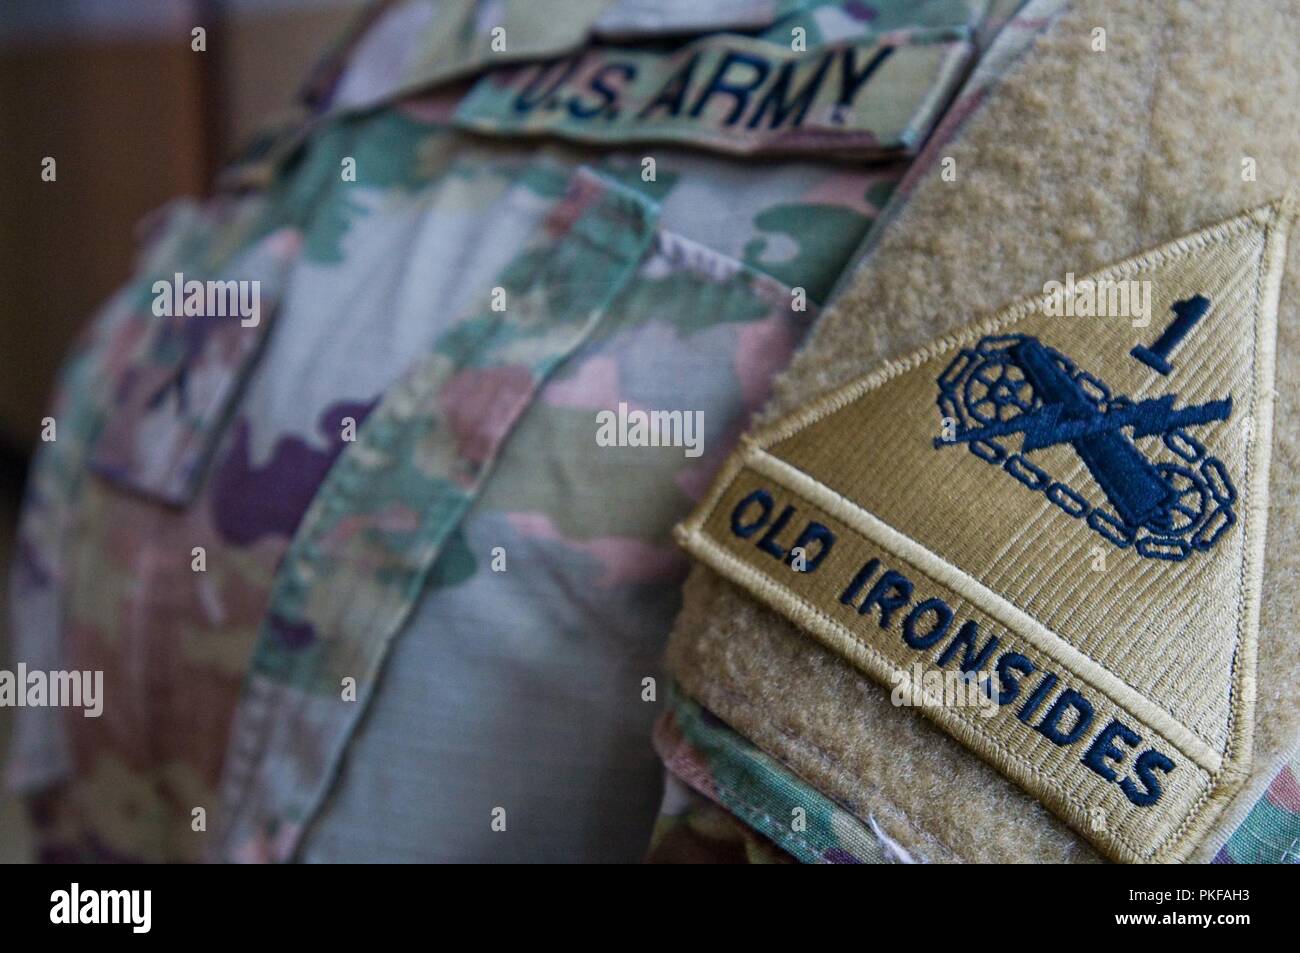 U.S. Army Pvt. Yamile Amarante, a postal clerk with the 178th Human Resources Company, 16th Special Troops Battalion, 1st Armored Division Sustainment Brigade, 1st Armored Division, shows off her unit patch “Old Ironsides,” Zagan, Poland, July 25, 2018. Soldiers with the 178th HRC work to provide postal support to Soldiers and civilians within the Atlantic Resolve area of operations. Stock Photo